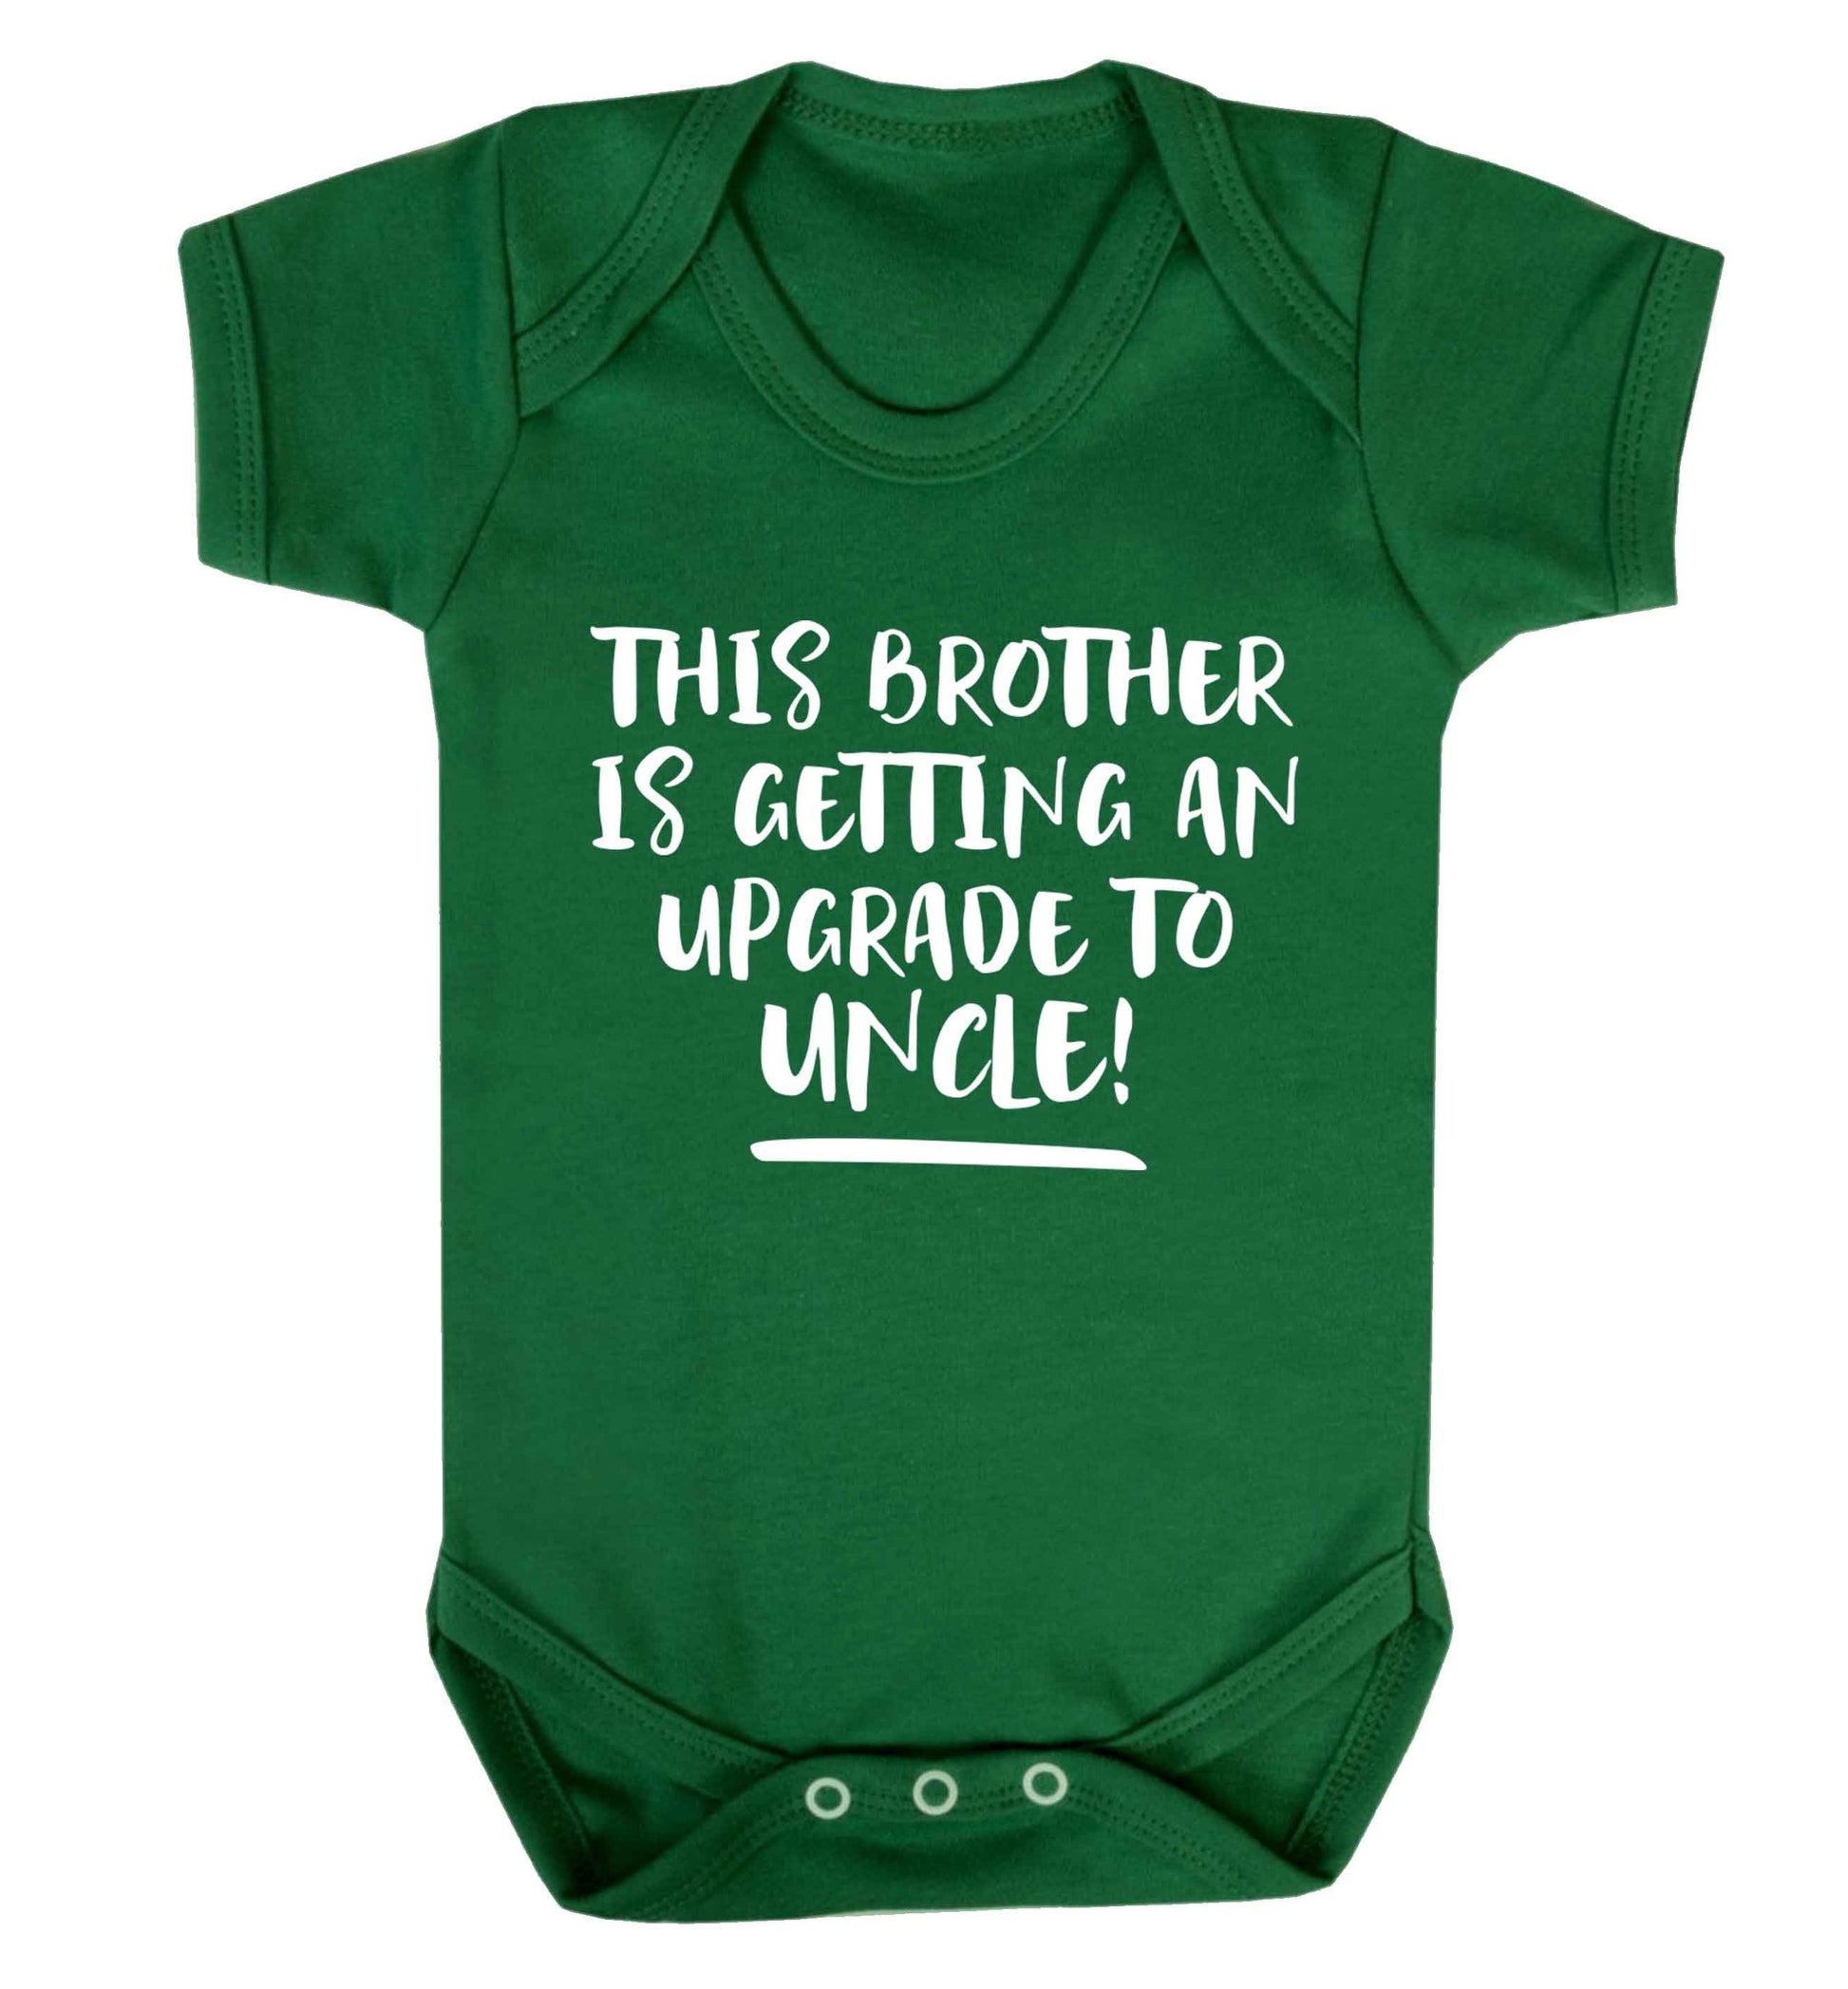 This brother is getting an upgrade to uncle! Baby Vest green 18-24 months